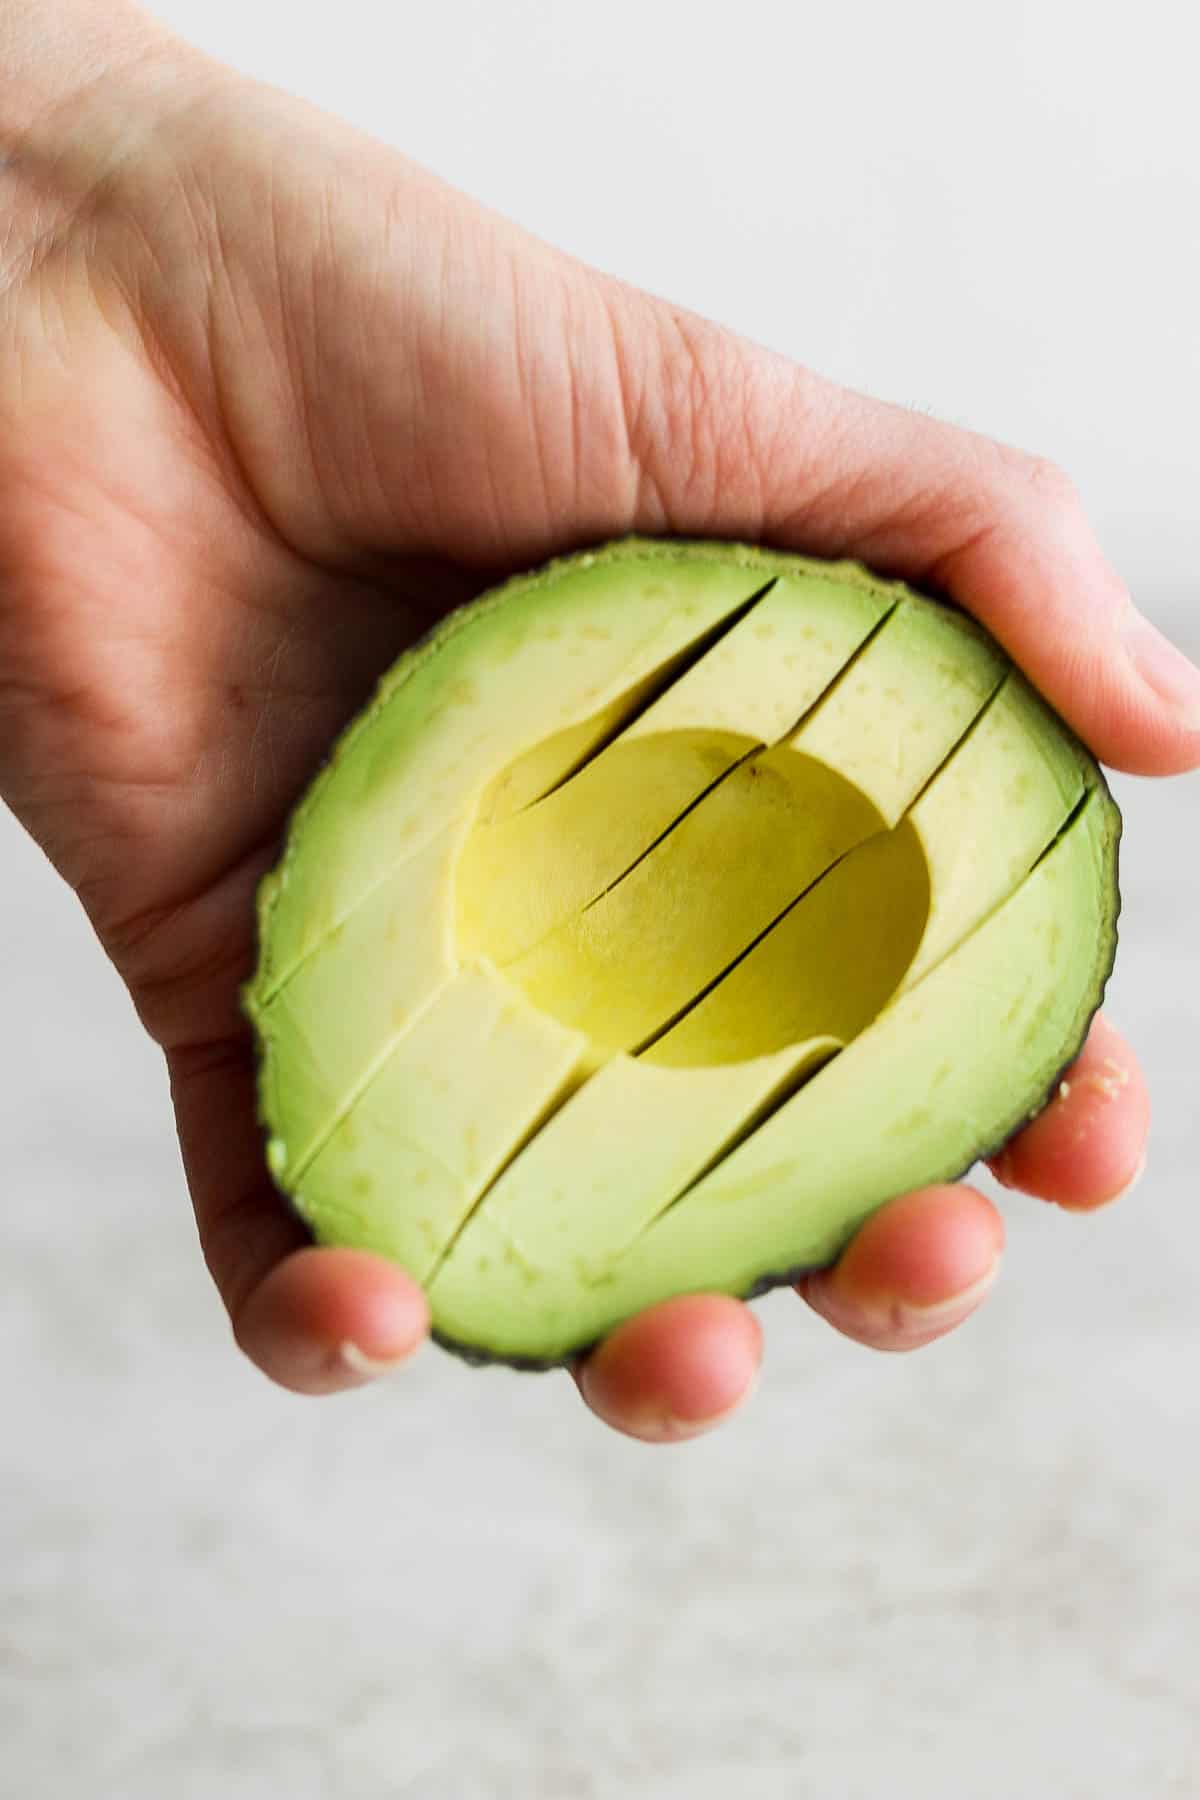 A hand holding half of an avocado that's been sliced.